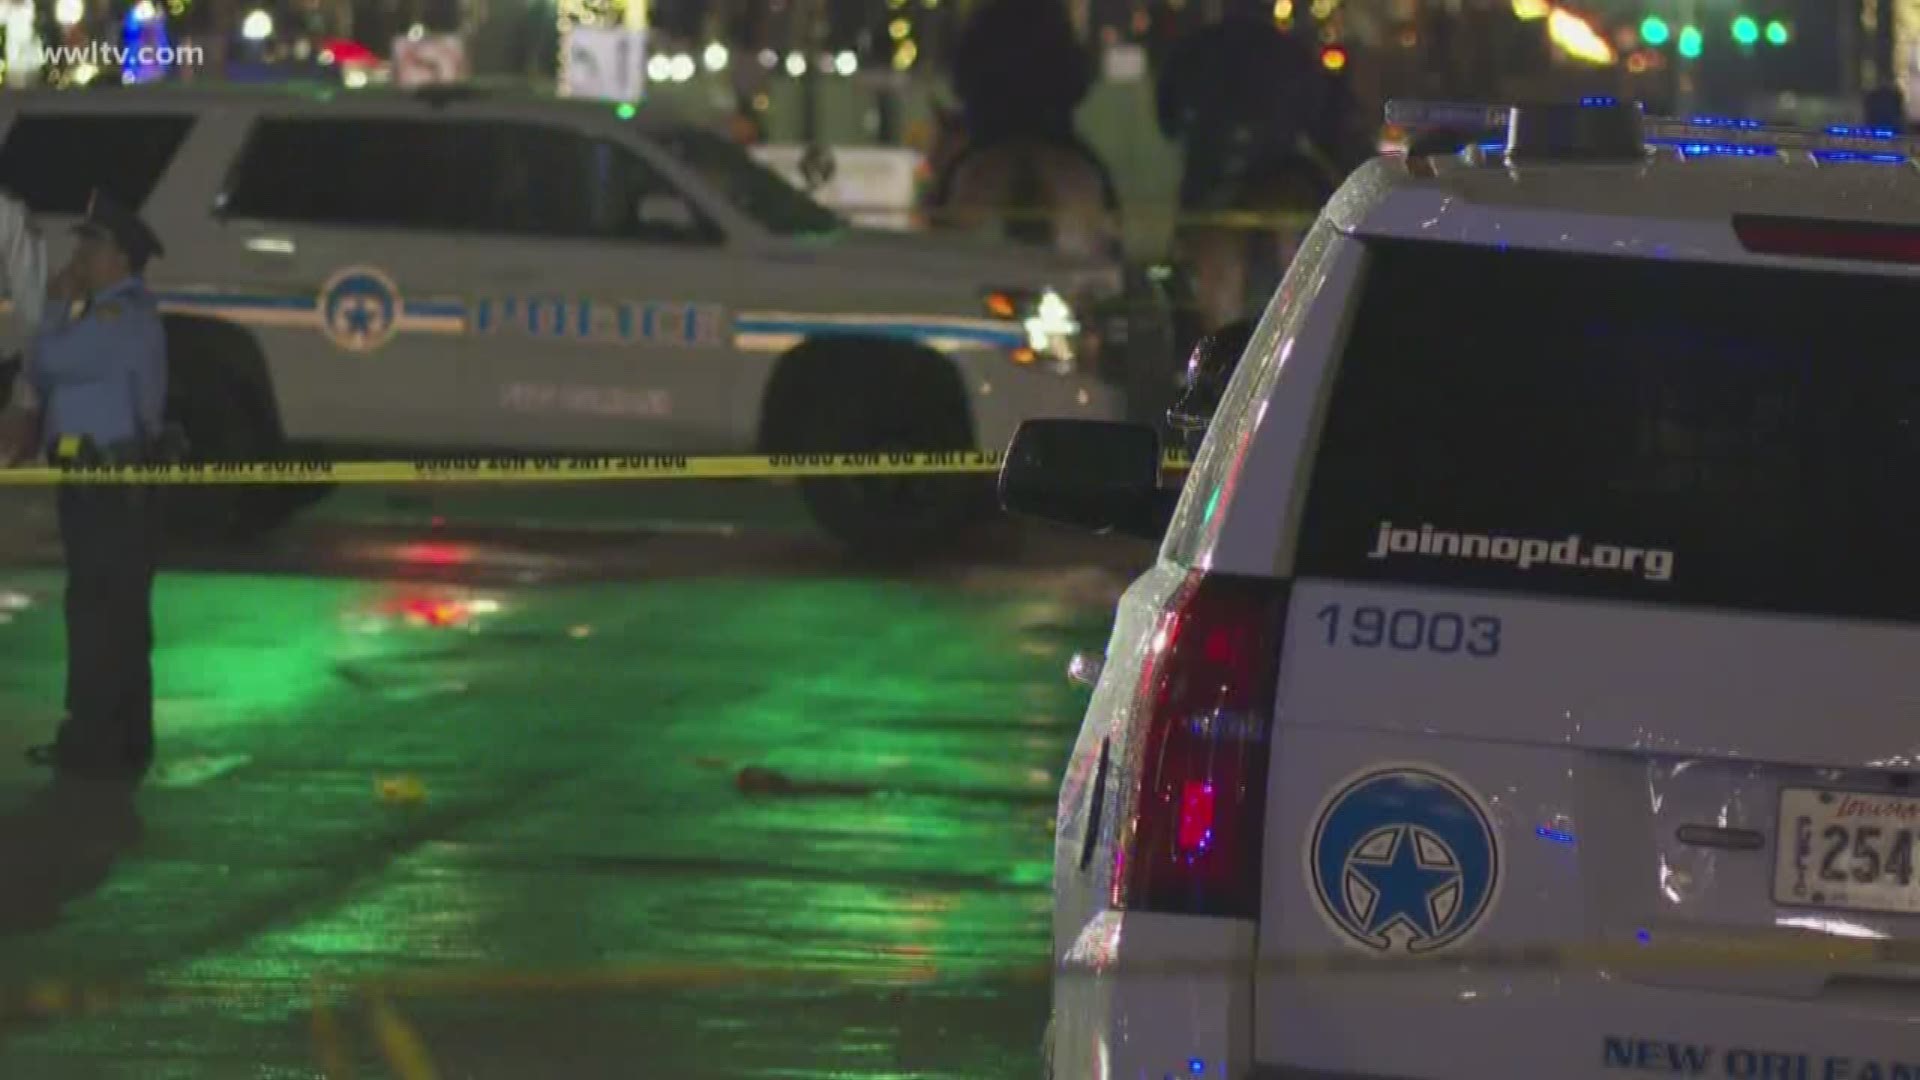 Eleven people have been shot after gunfire erupted on Canal Street early Sunday morning.